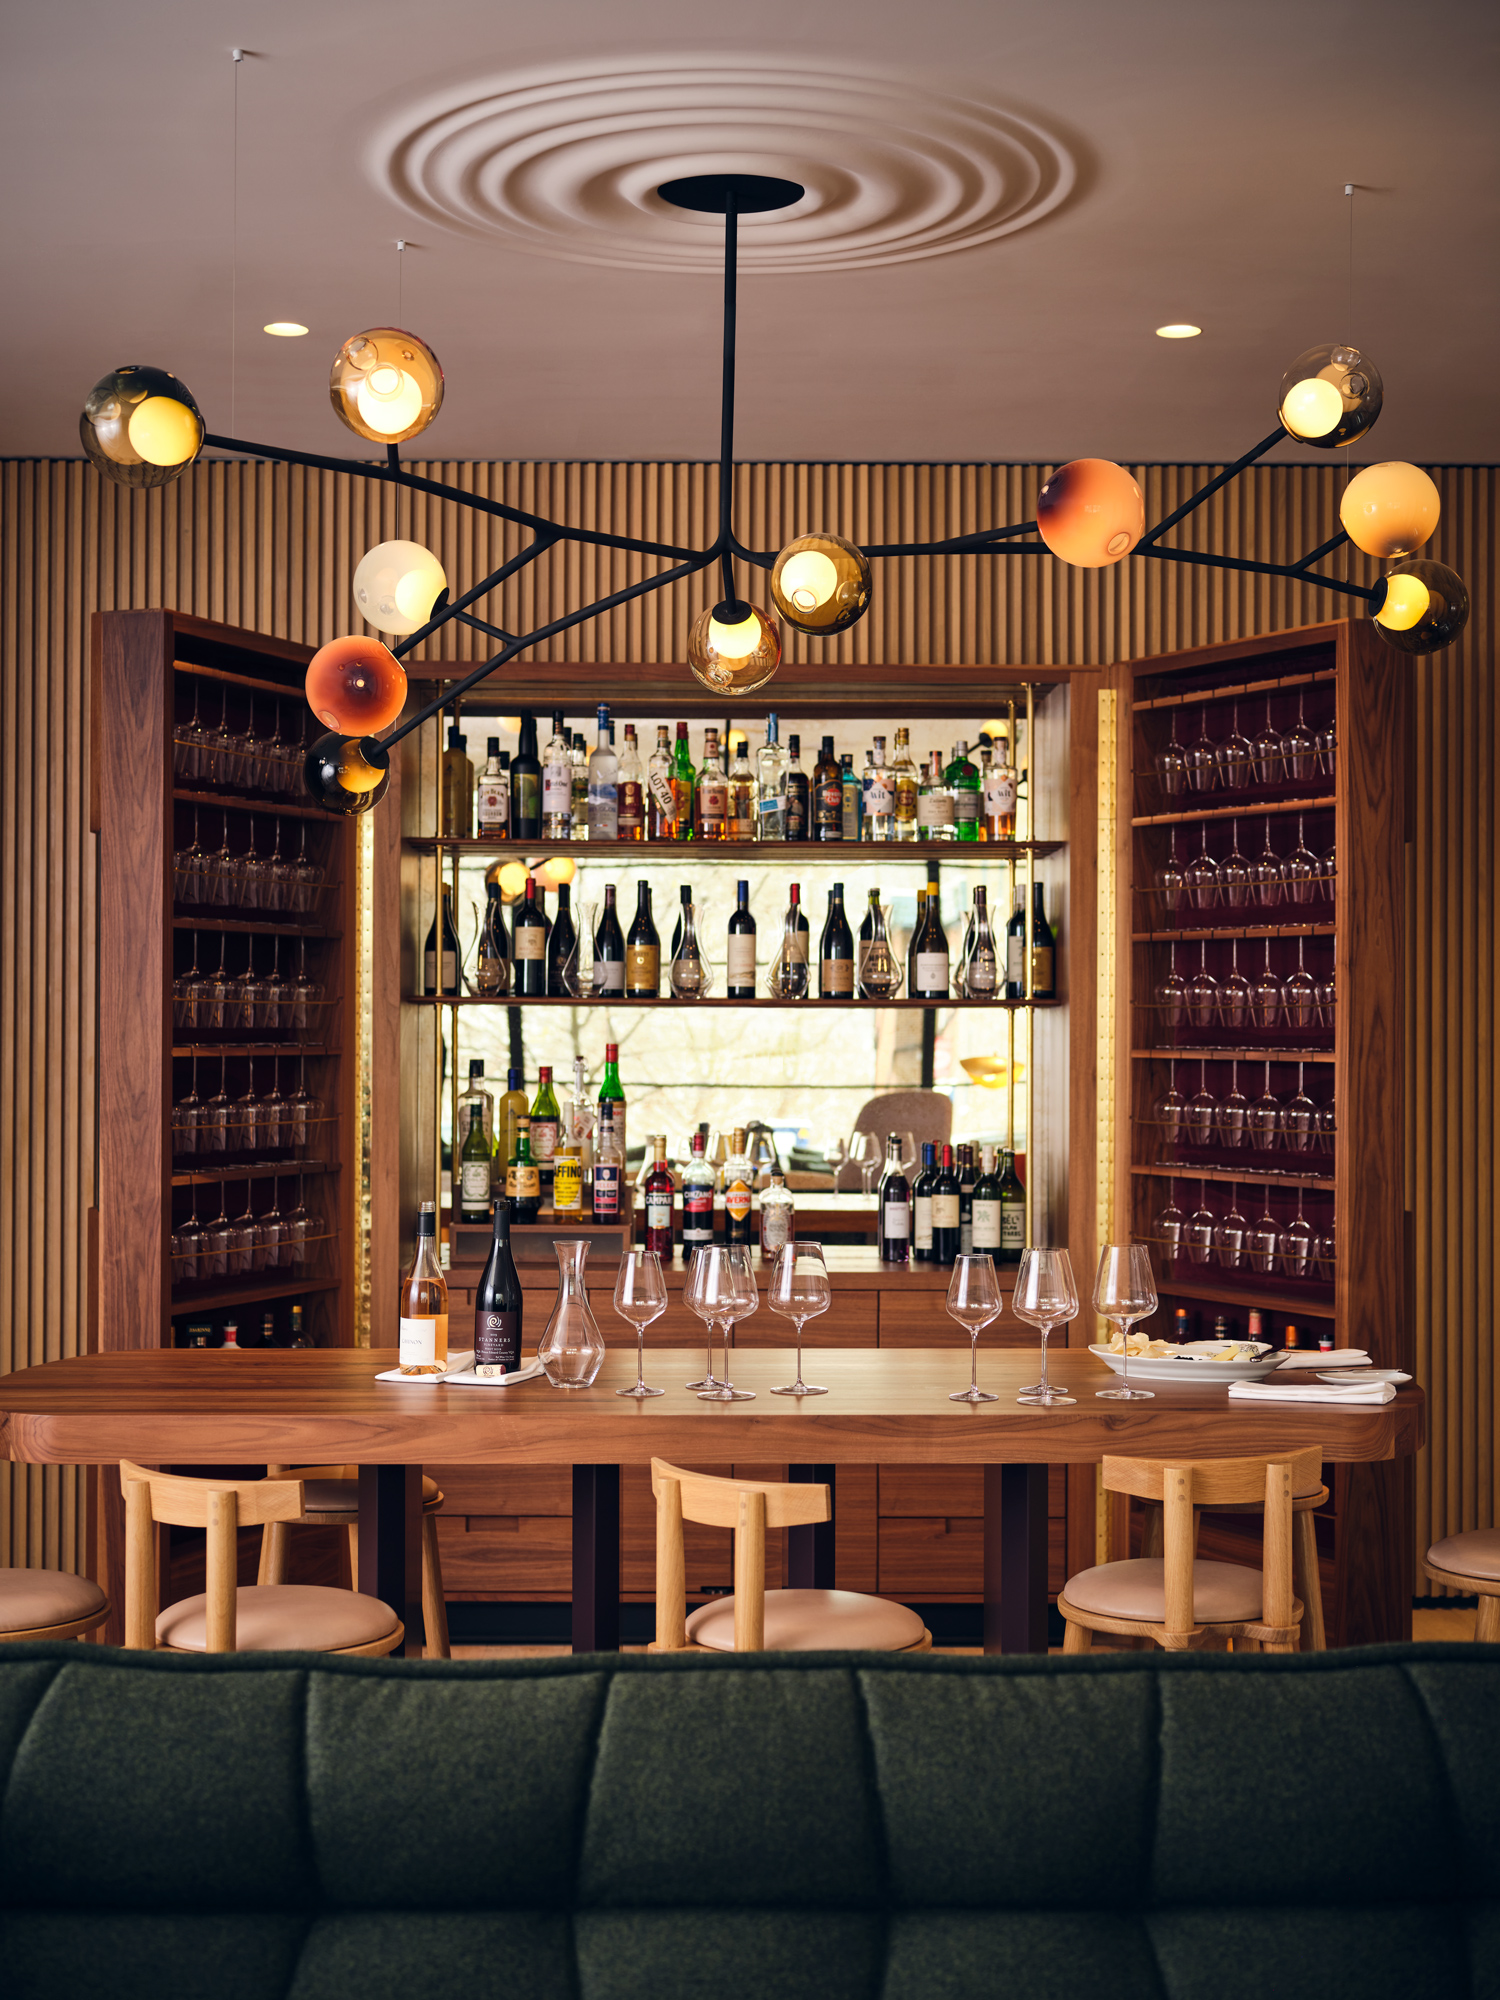 Welcoming bar with stools, beautiful light fixture overhead